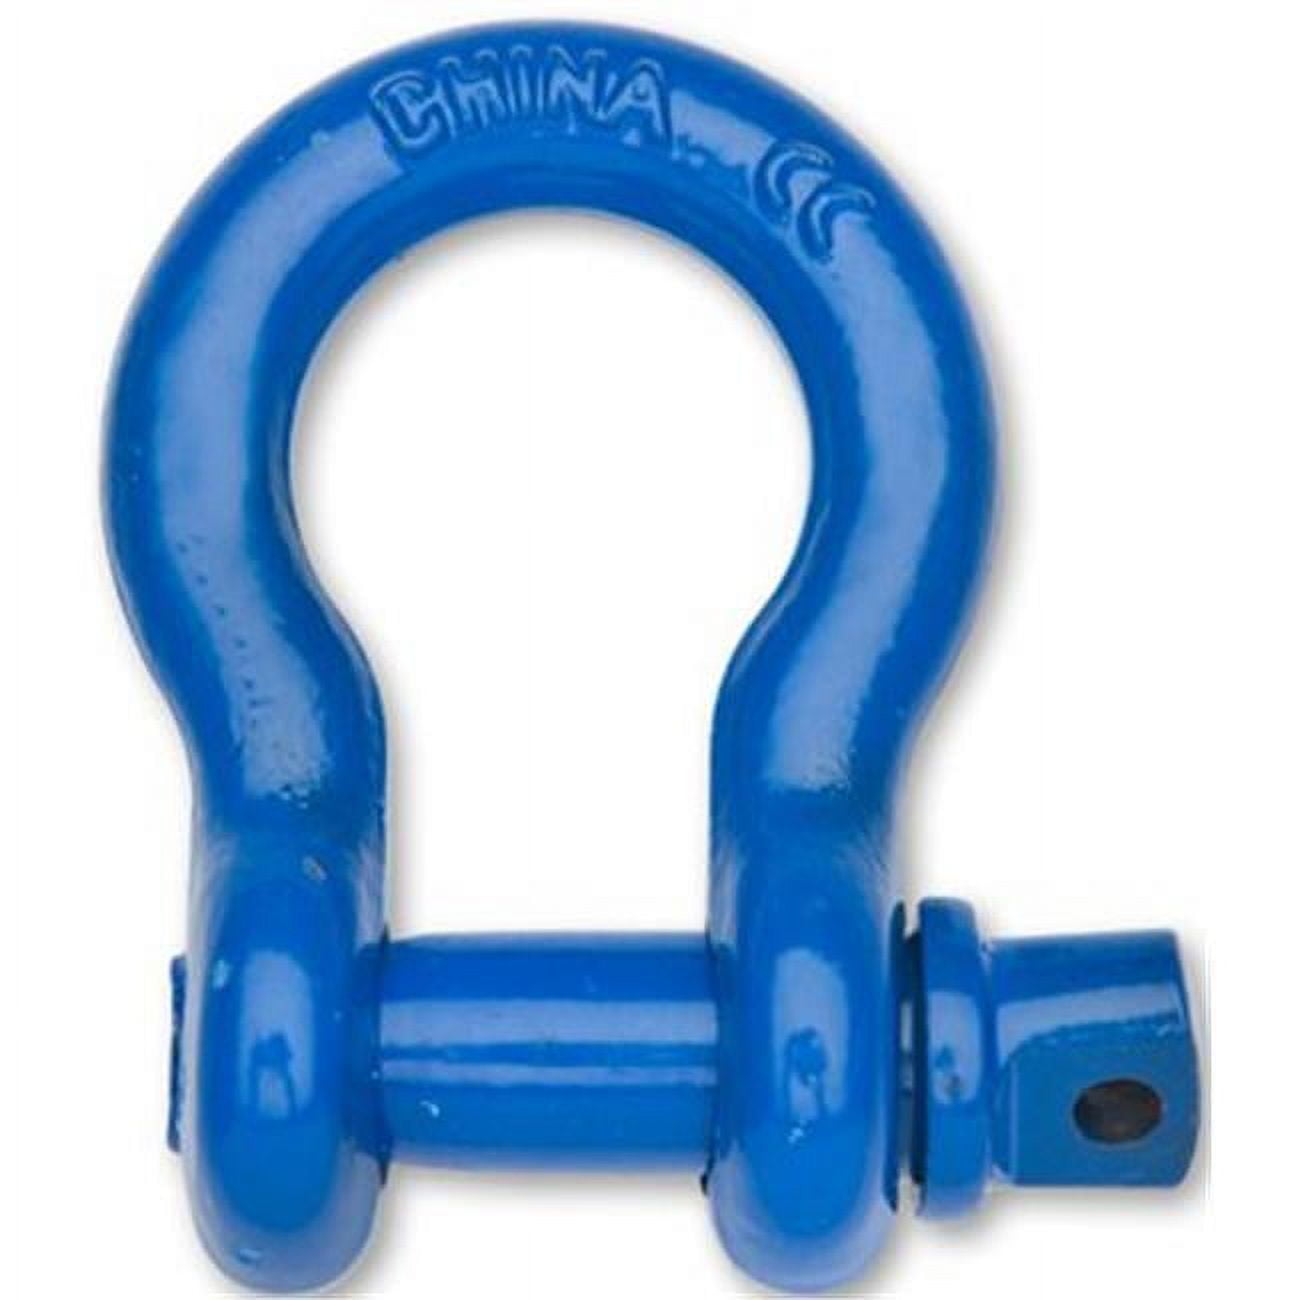 Picture of Apex T9641605 1 in. 8.5 Ton Farm Clevis, Blue